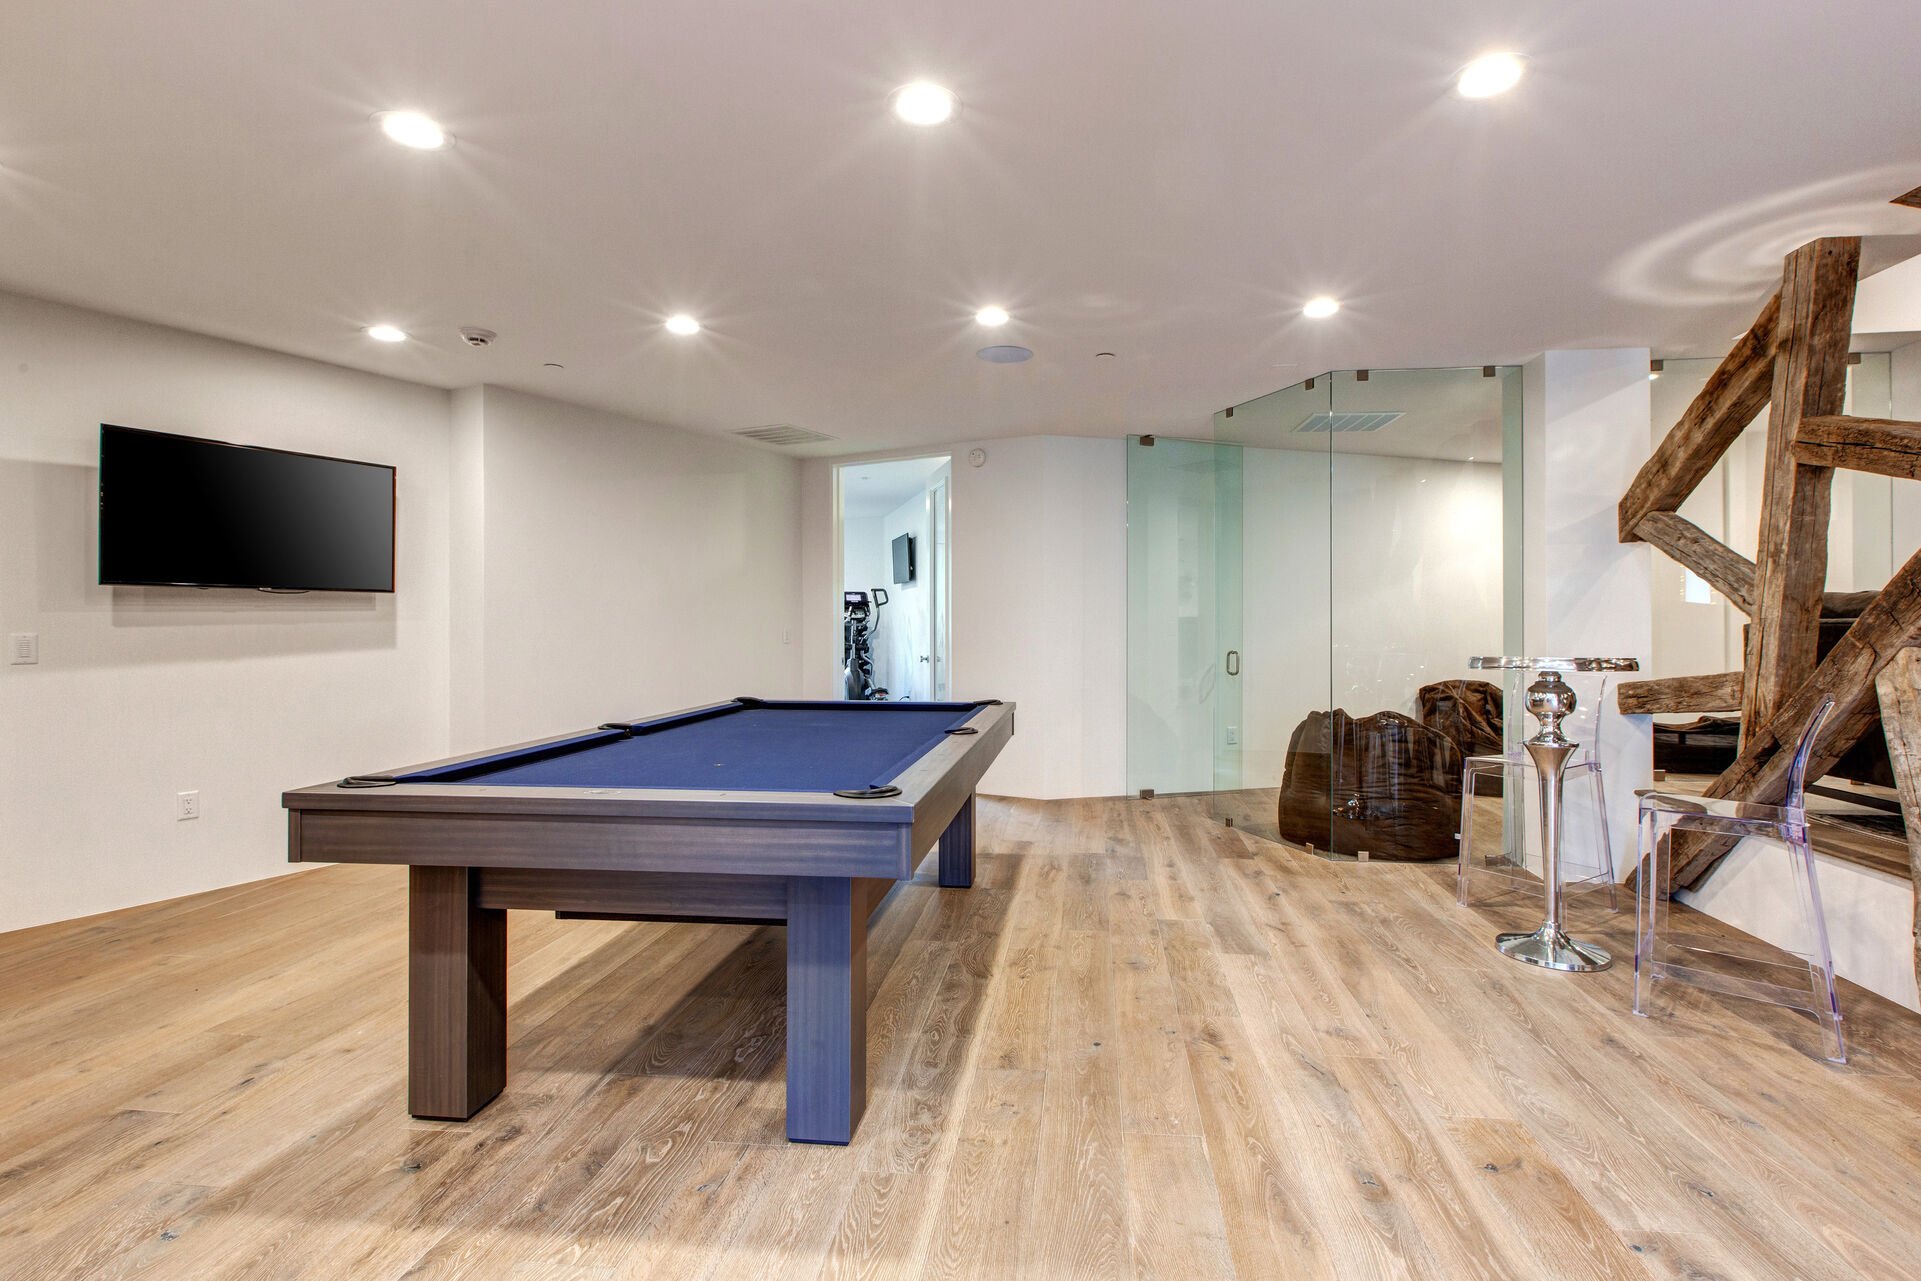 Watch Your Favorite Sports Team While Showing Your Skills on the Pool Table